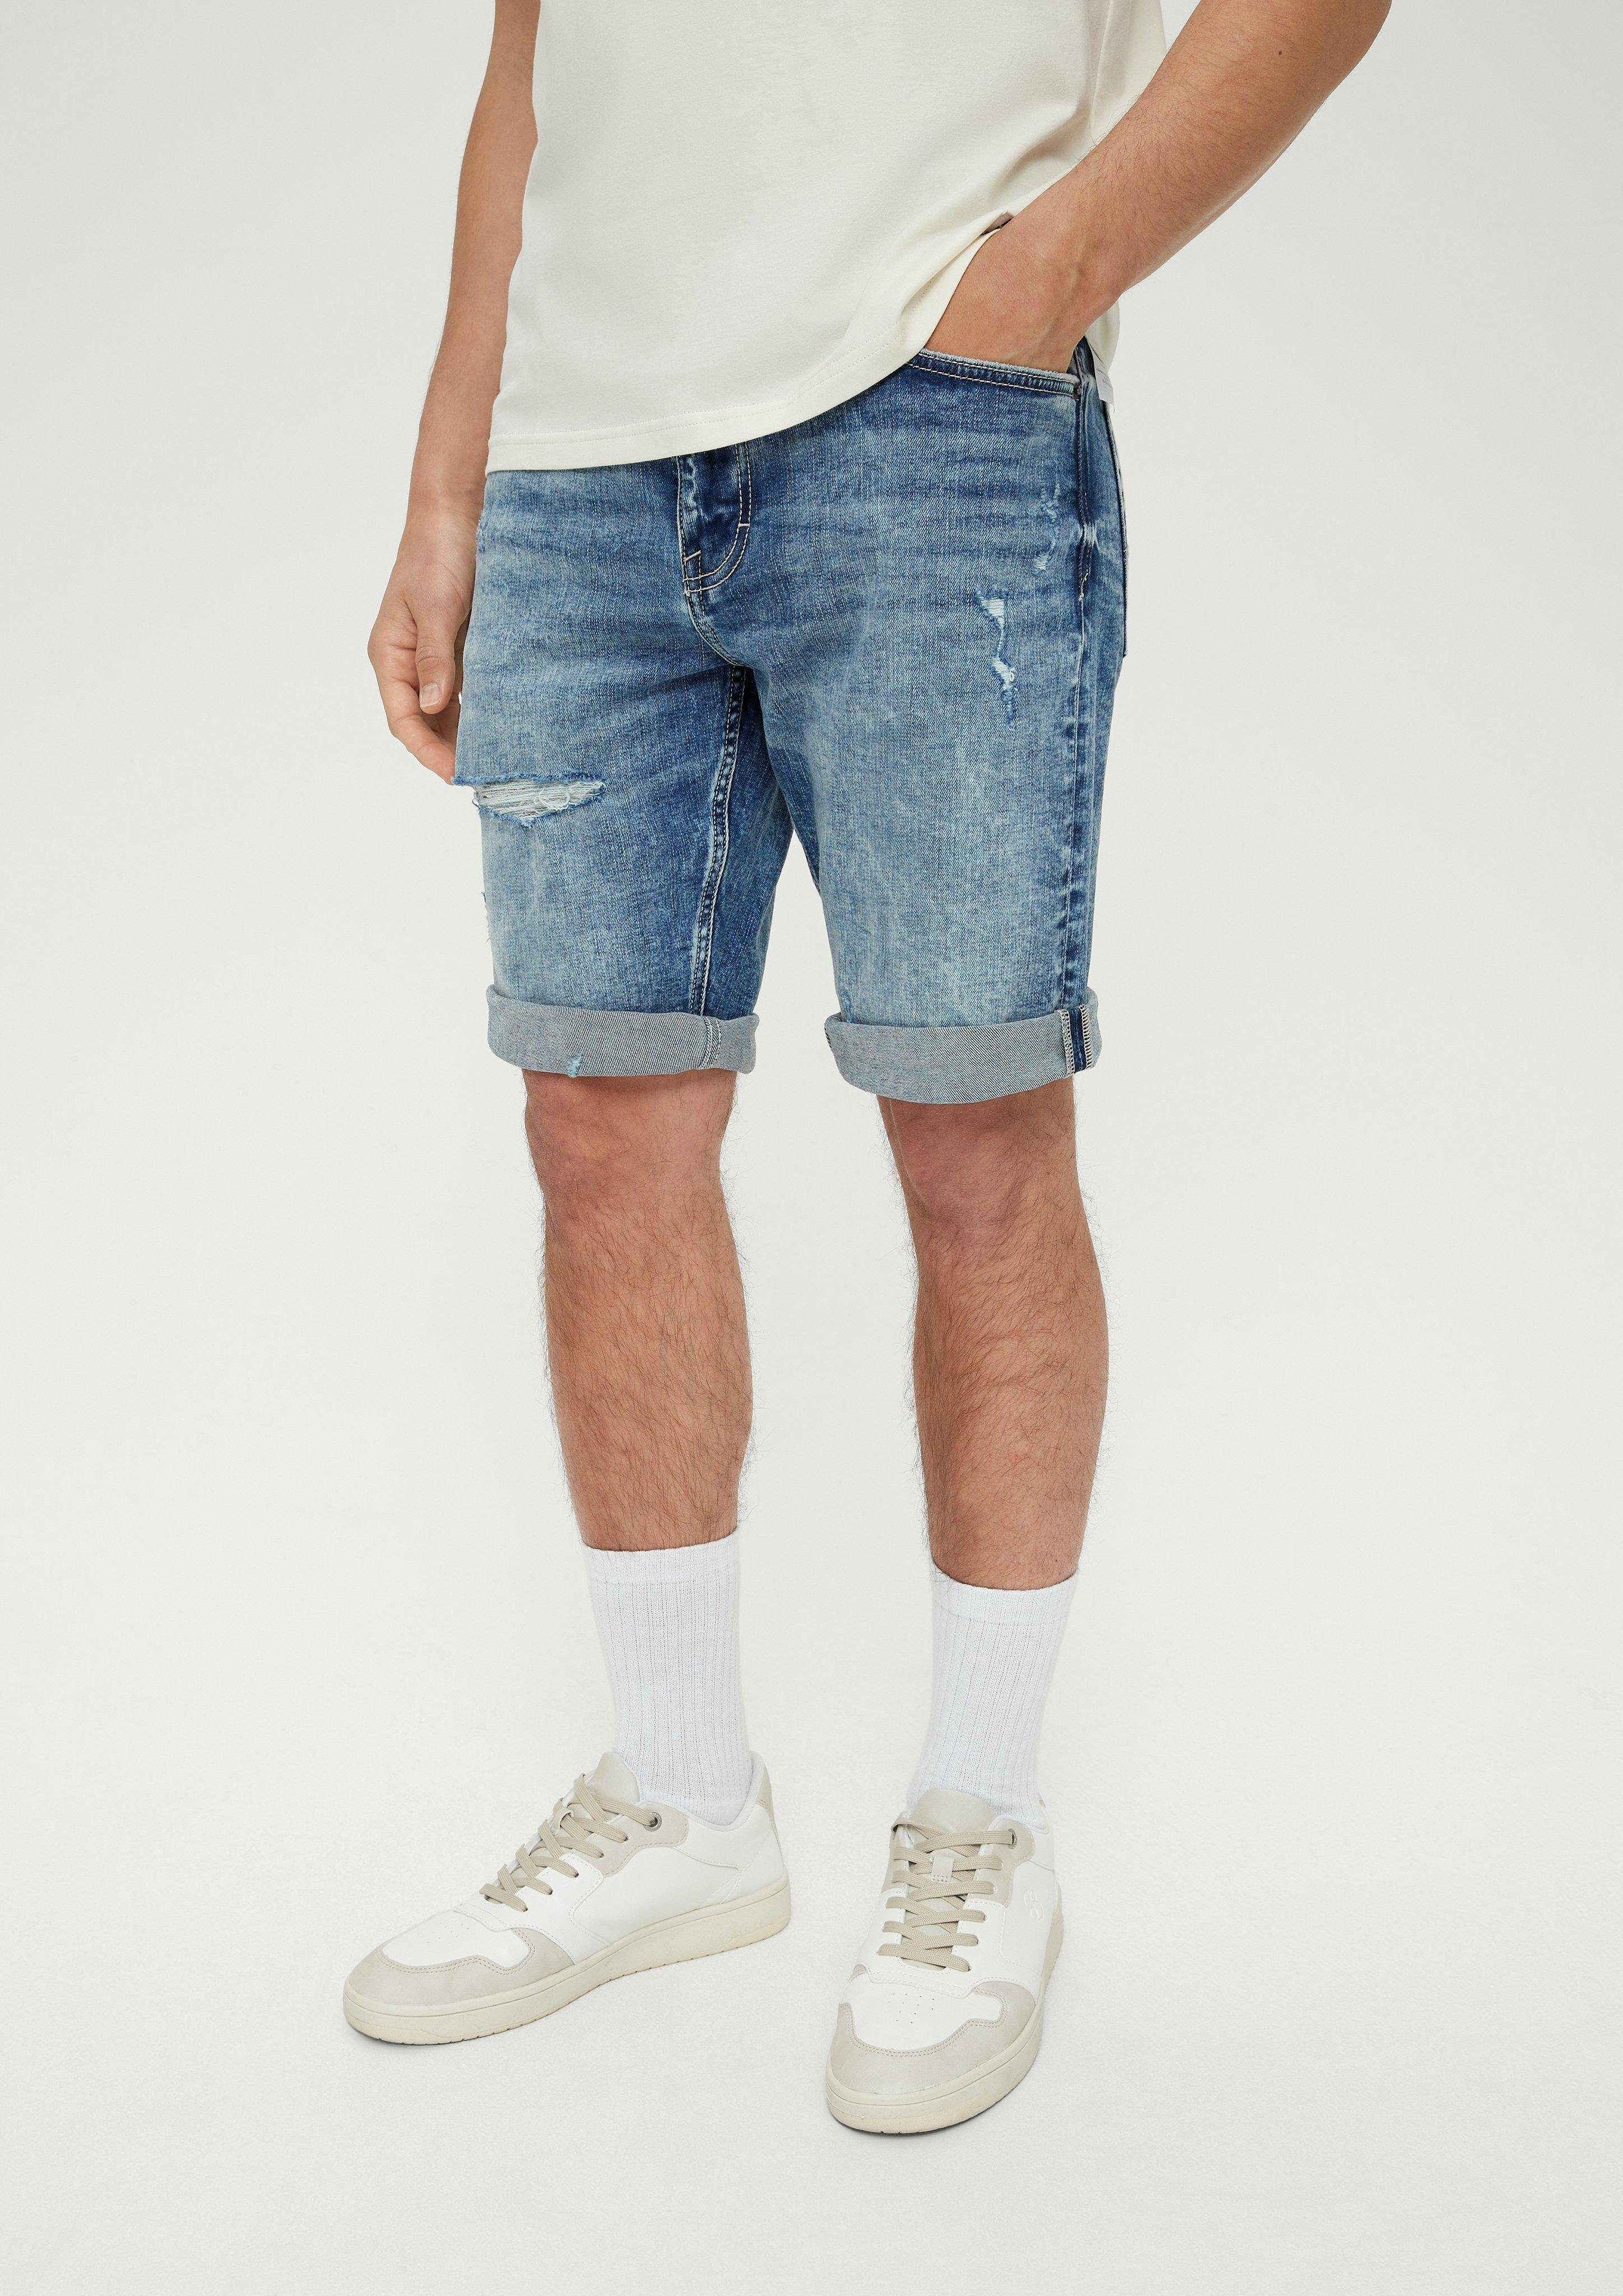 Tolle Online-Shopping-Seite QS Jeansshorts Jeans-Bermuda John / Rise Fit Regular / Straight Waschung, Destroyes / Mid Leg